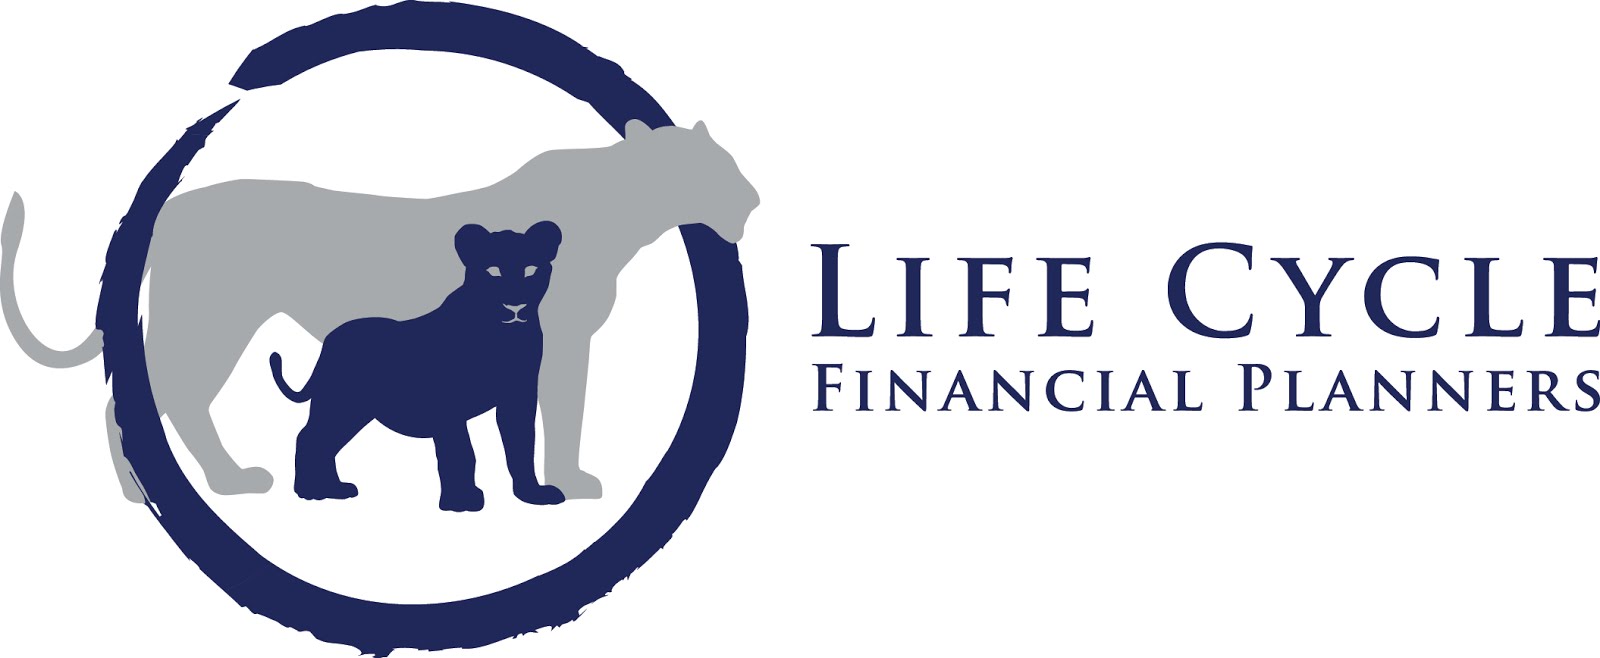 Life Cycle Financial Planning - Ted Bernstein